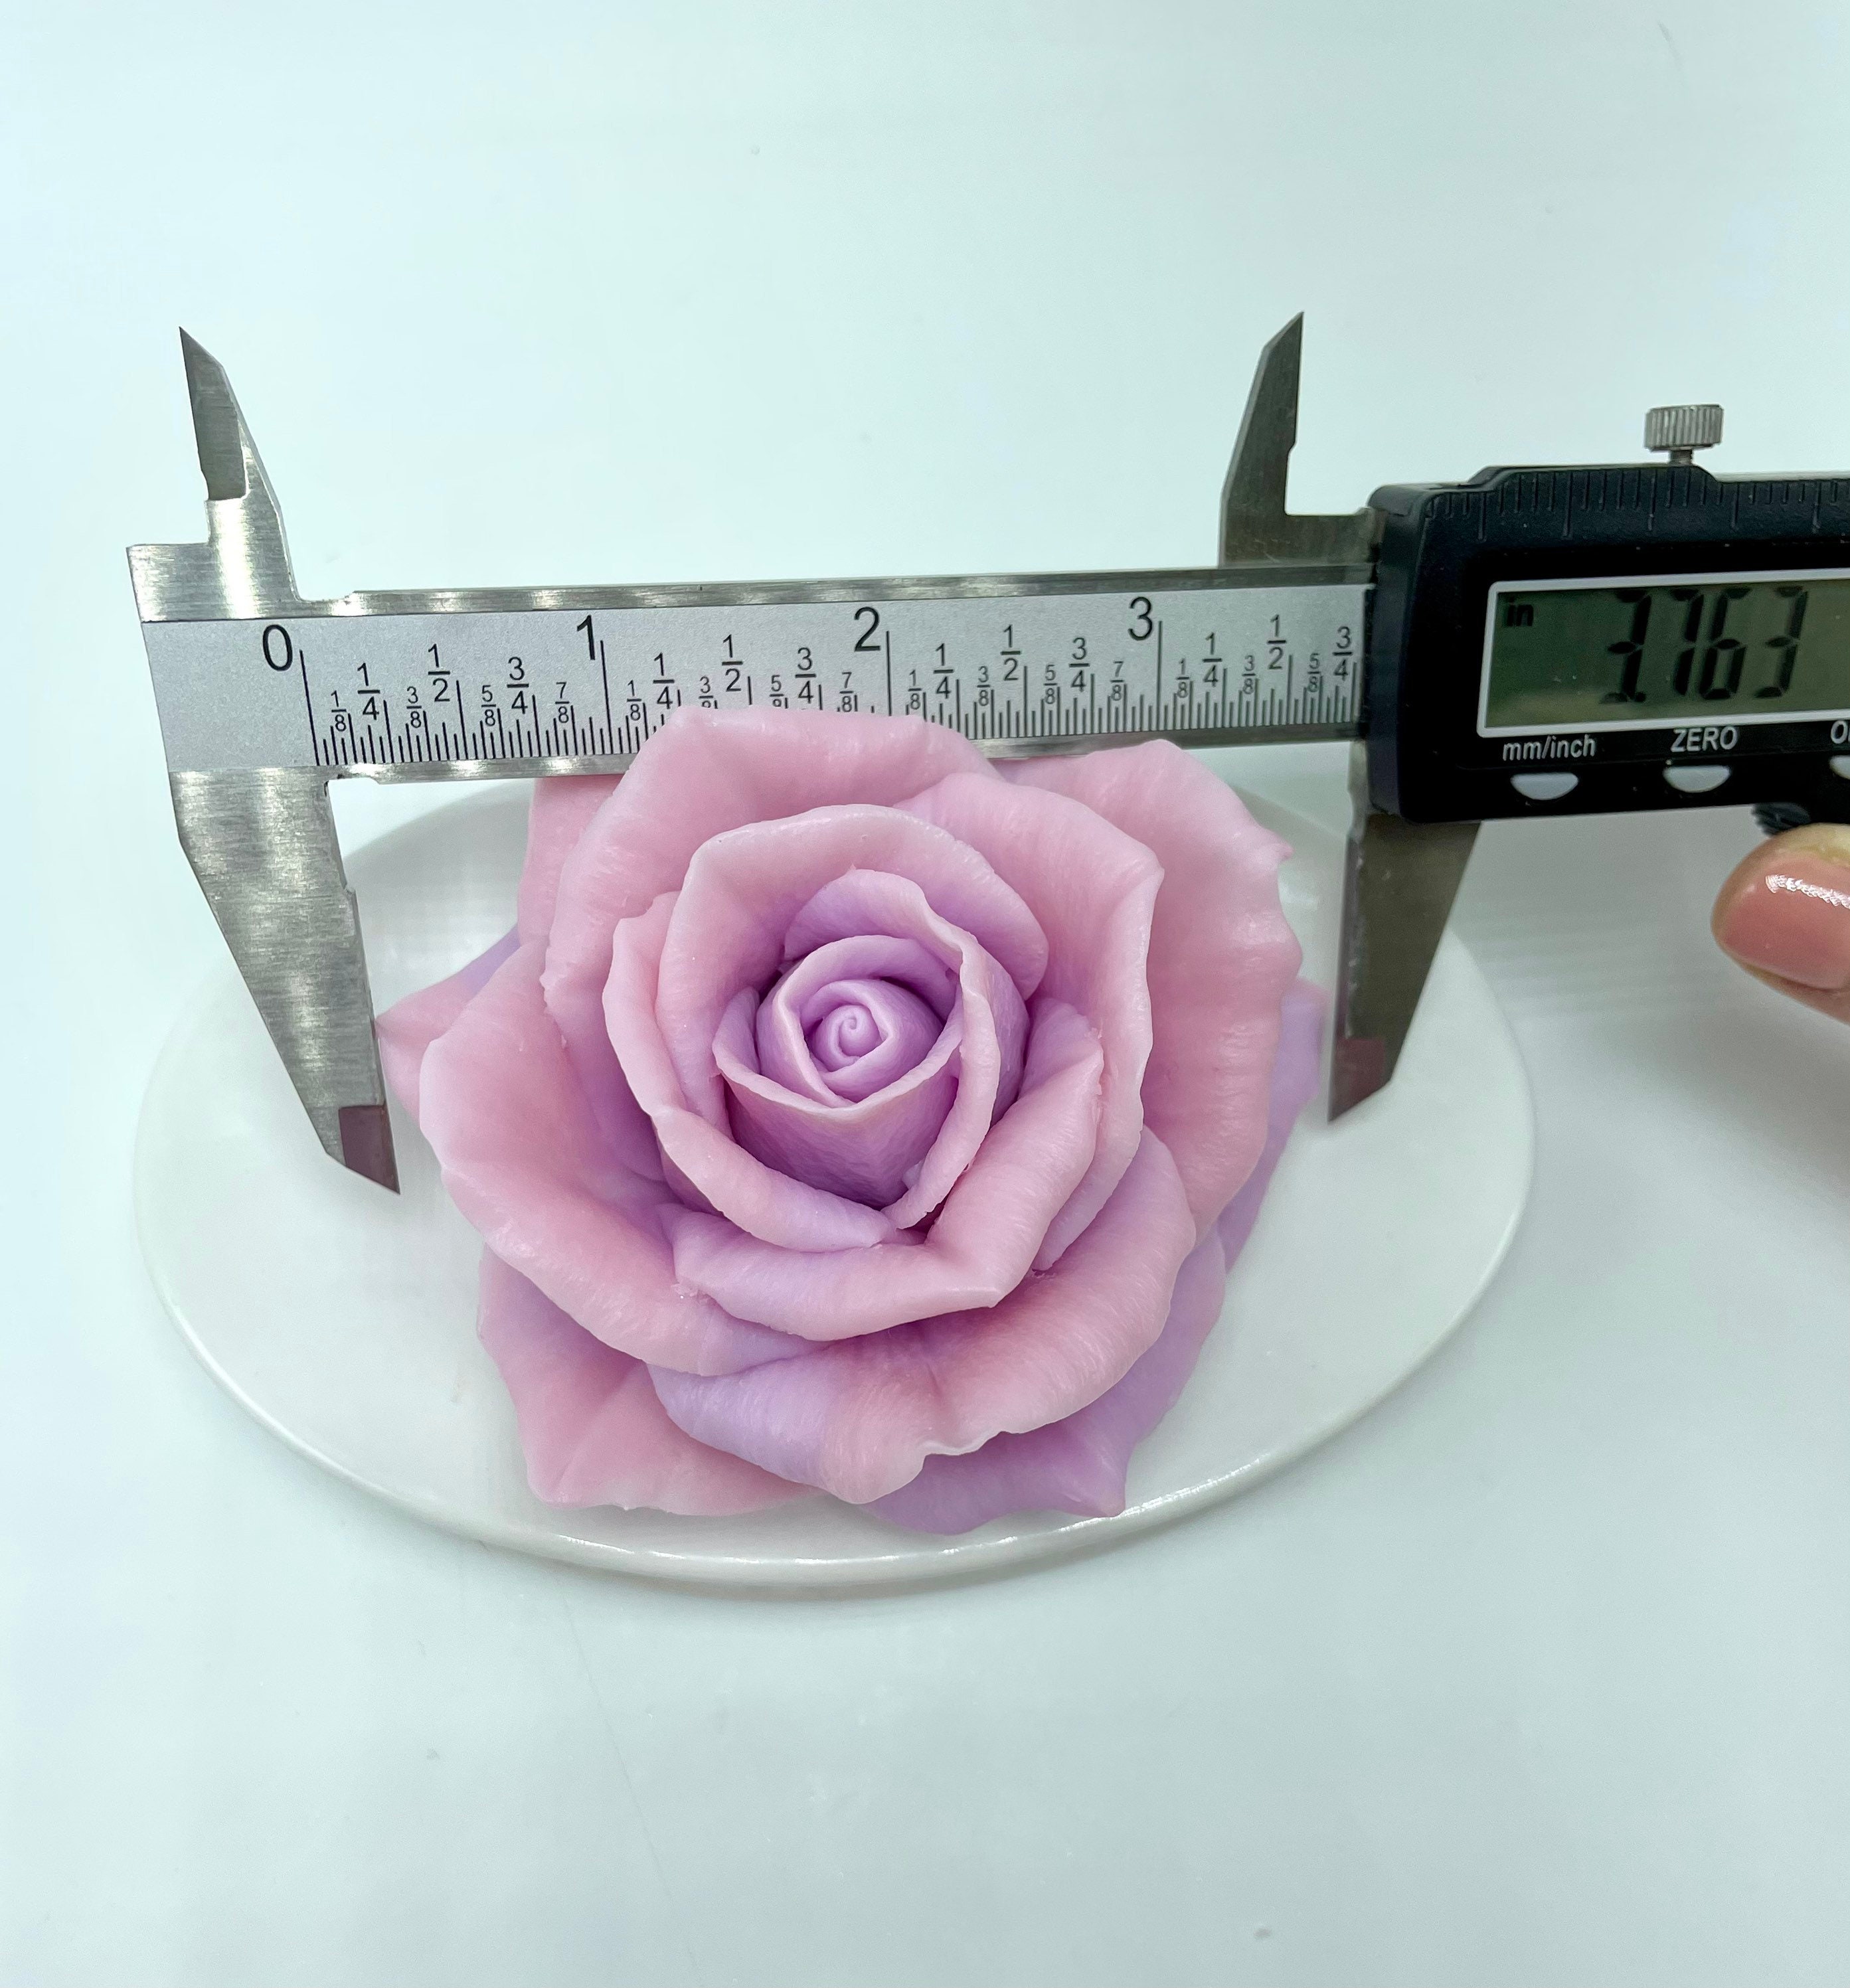 Large Size Silicone Mould Soap Candle Fondant Making Mold 3D Rose Flower  Shape DIY Gadget Pastry Cake Decoration Flower Nails Baking From  Ecofriendlyshop, $4.57